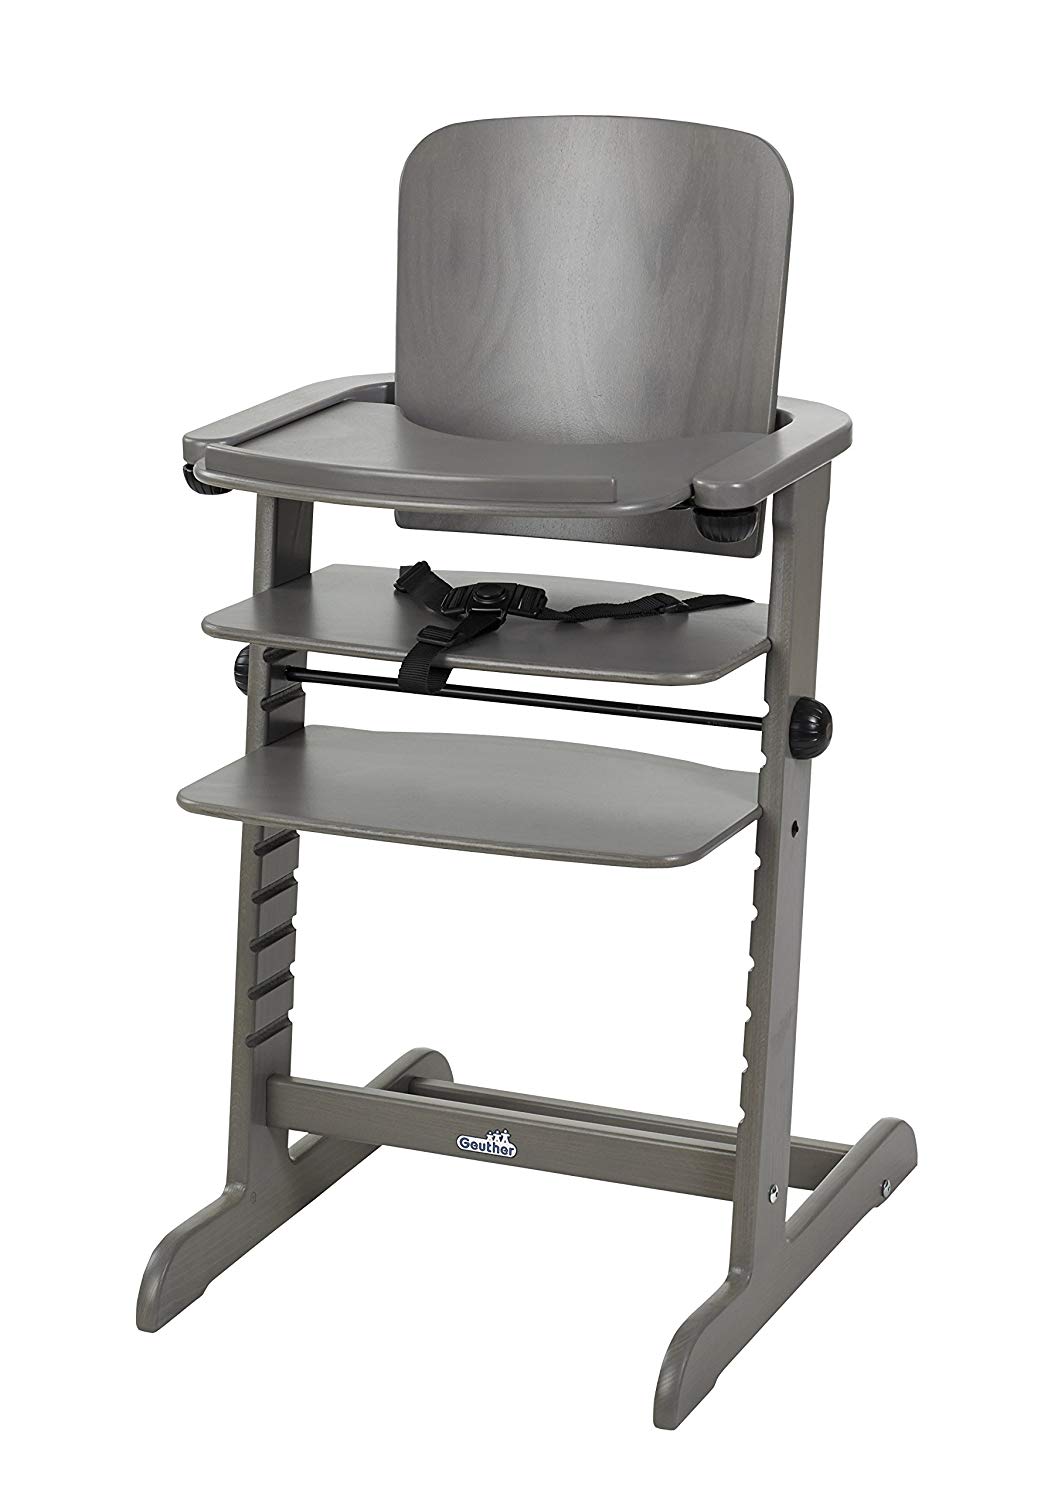 Geuther High Chair/Grows Family Clay mud